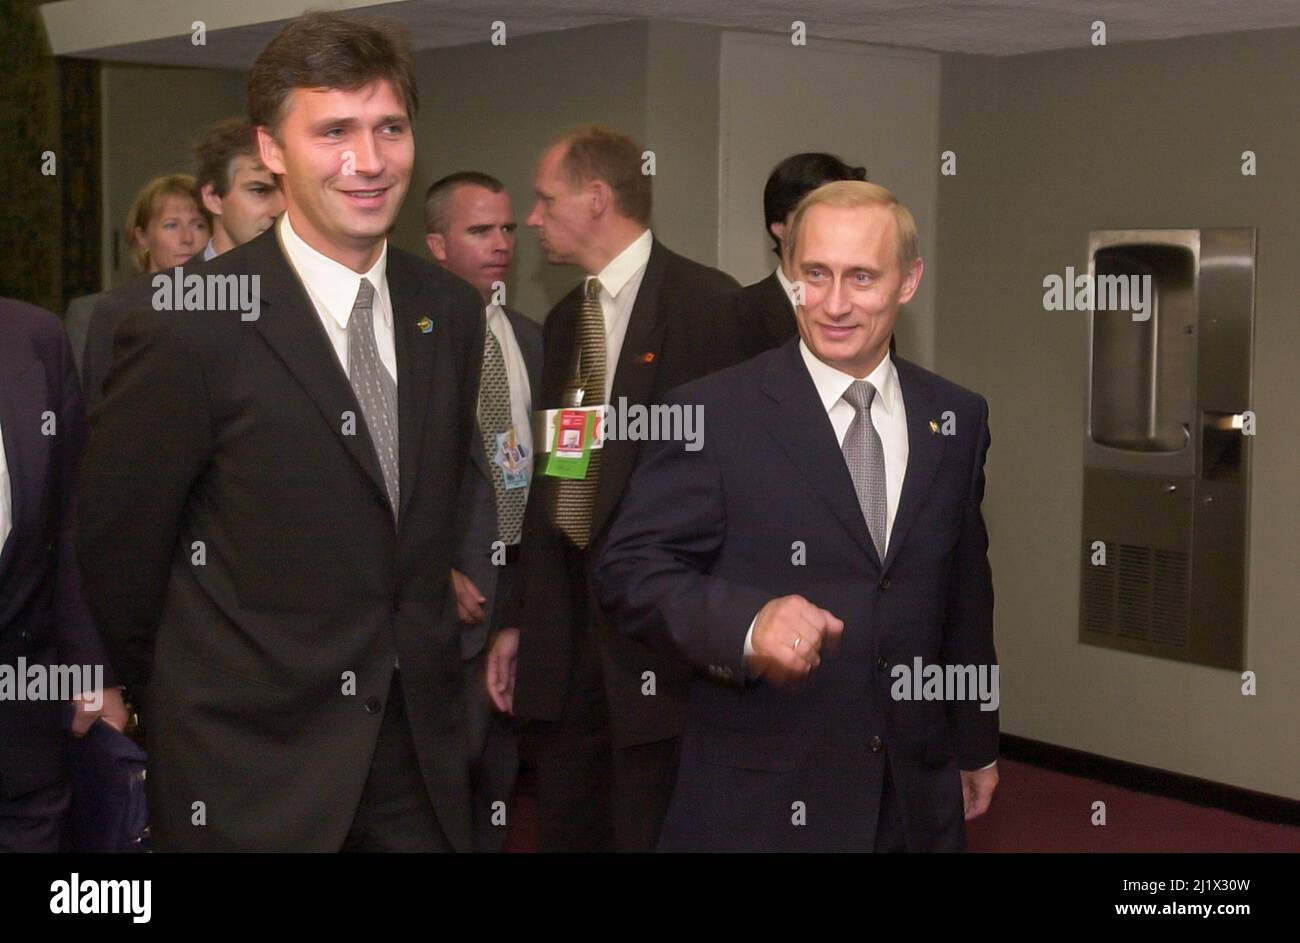 The then Prime Minister of Norway, Mr. Jens Stoltenberg, accompanying newly elected President of Russia, Mr. Vladimir Putin, to a meeting during the annual General Assembly at the United Nations. Norway had asked for the meeting as part of their campaign to get a seat at the United Nations Security Council. Norway eventually won the seat. Years later, Mr. Jens Stoltenberg went on to become Secretary General of NATO - North Atlantic Treaty Organization. Stock Photo